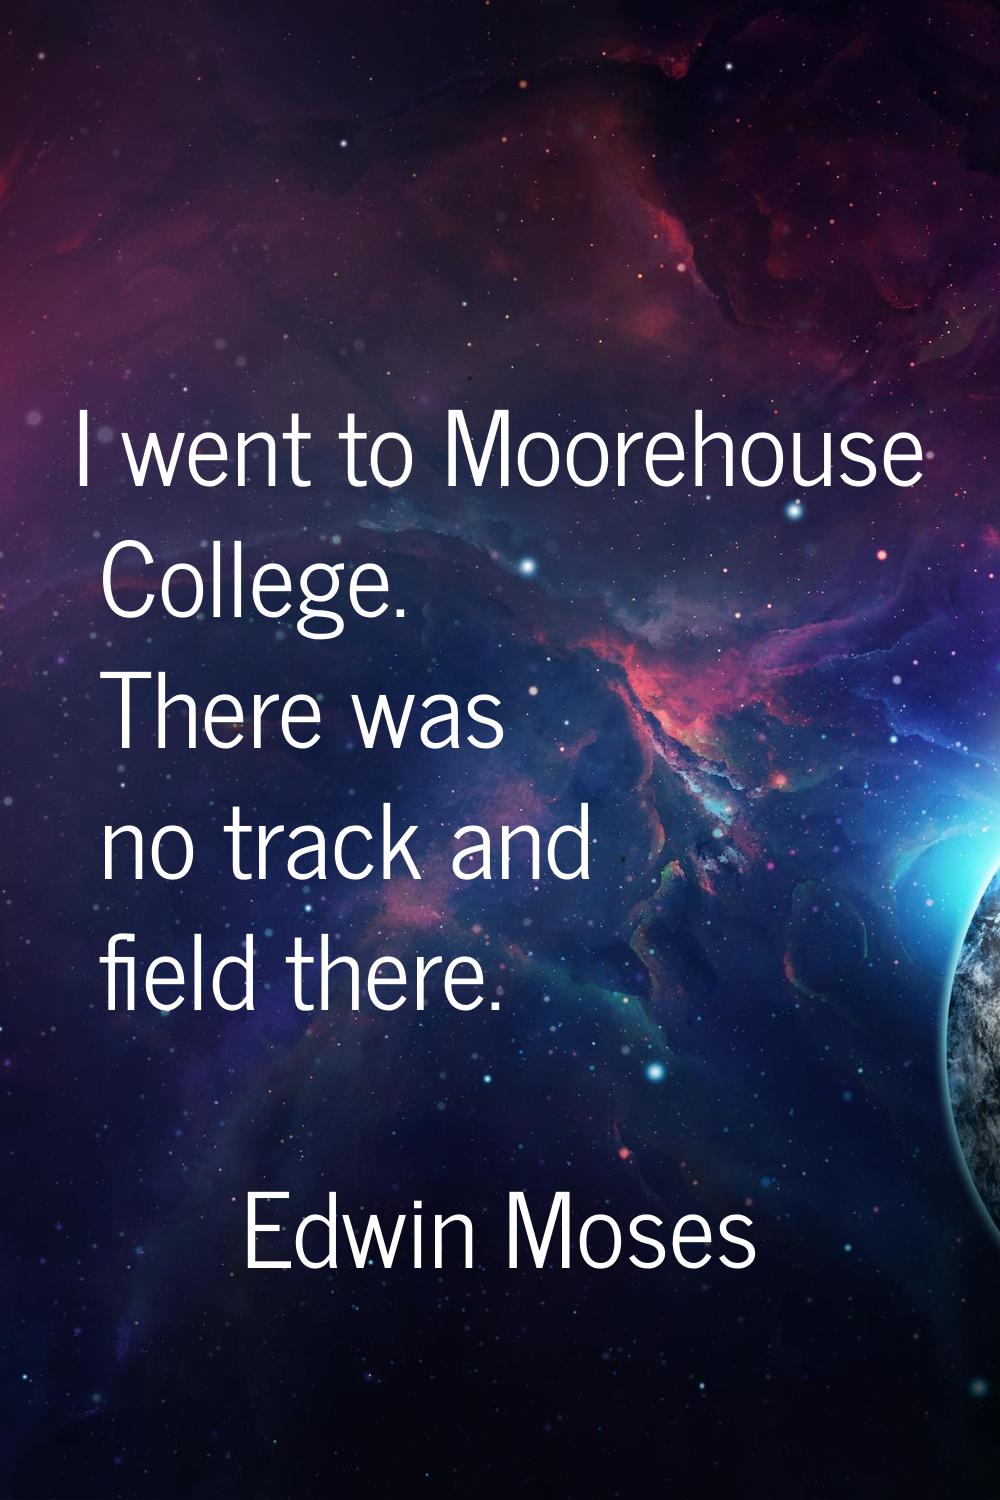 I went to Moorehouse College. There was no track and field there.